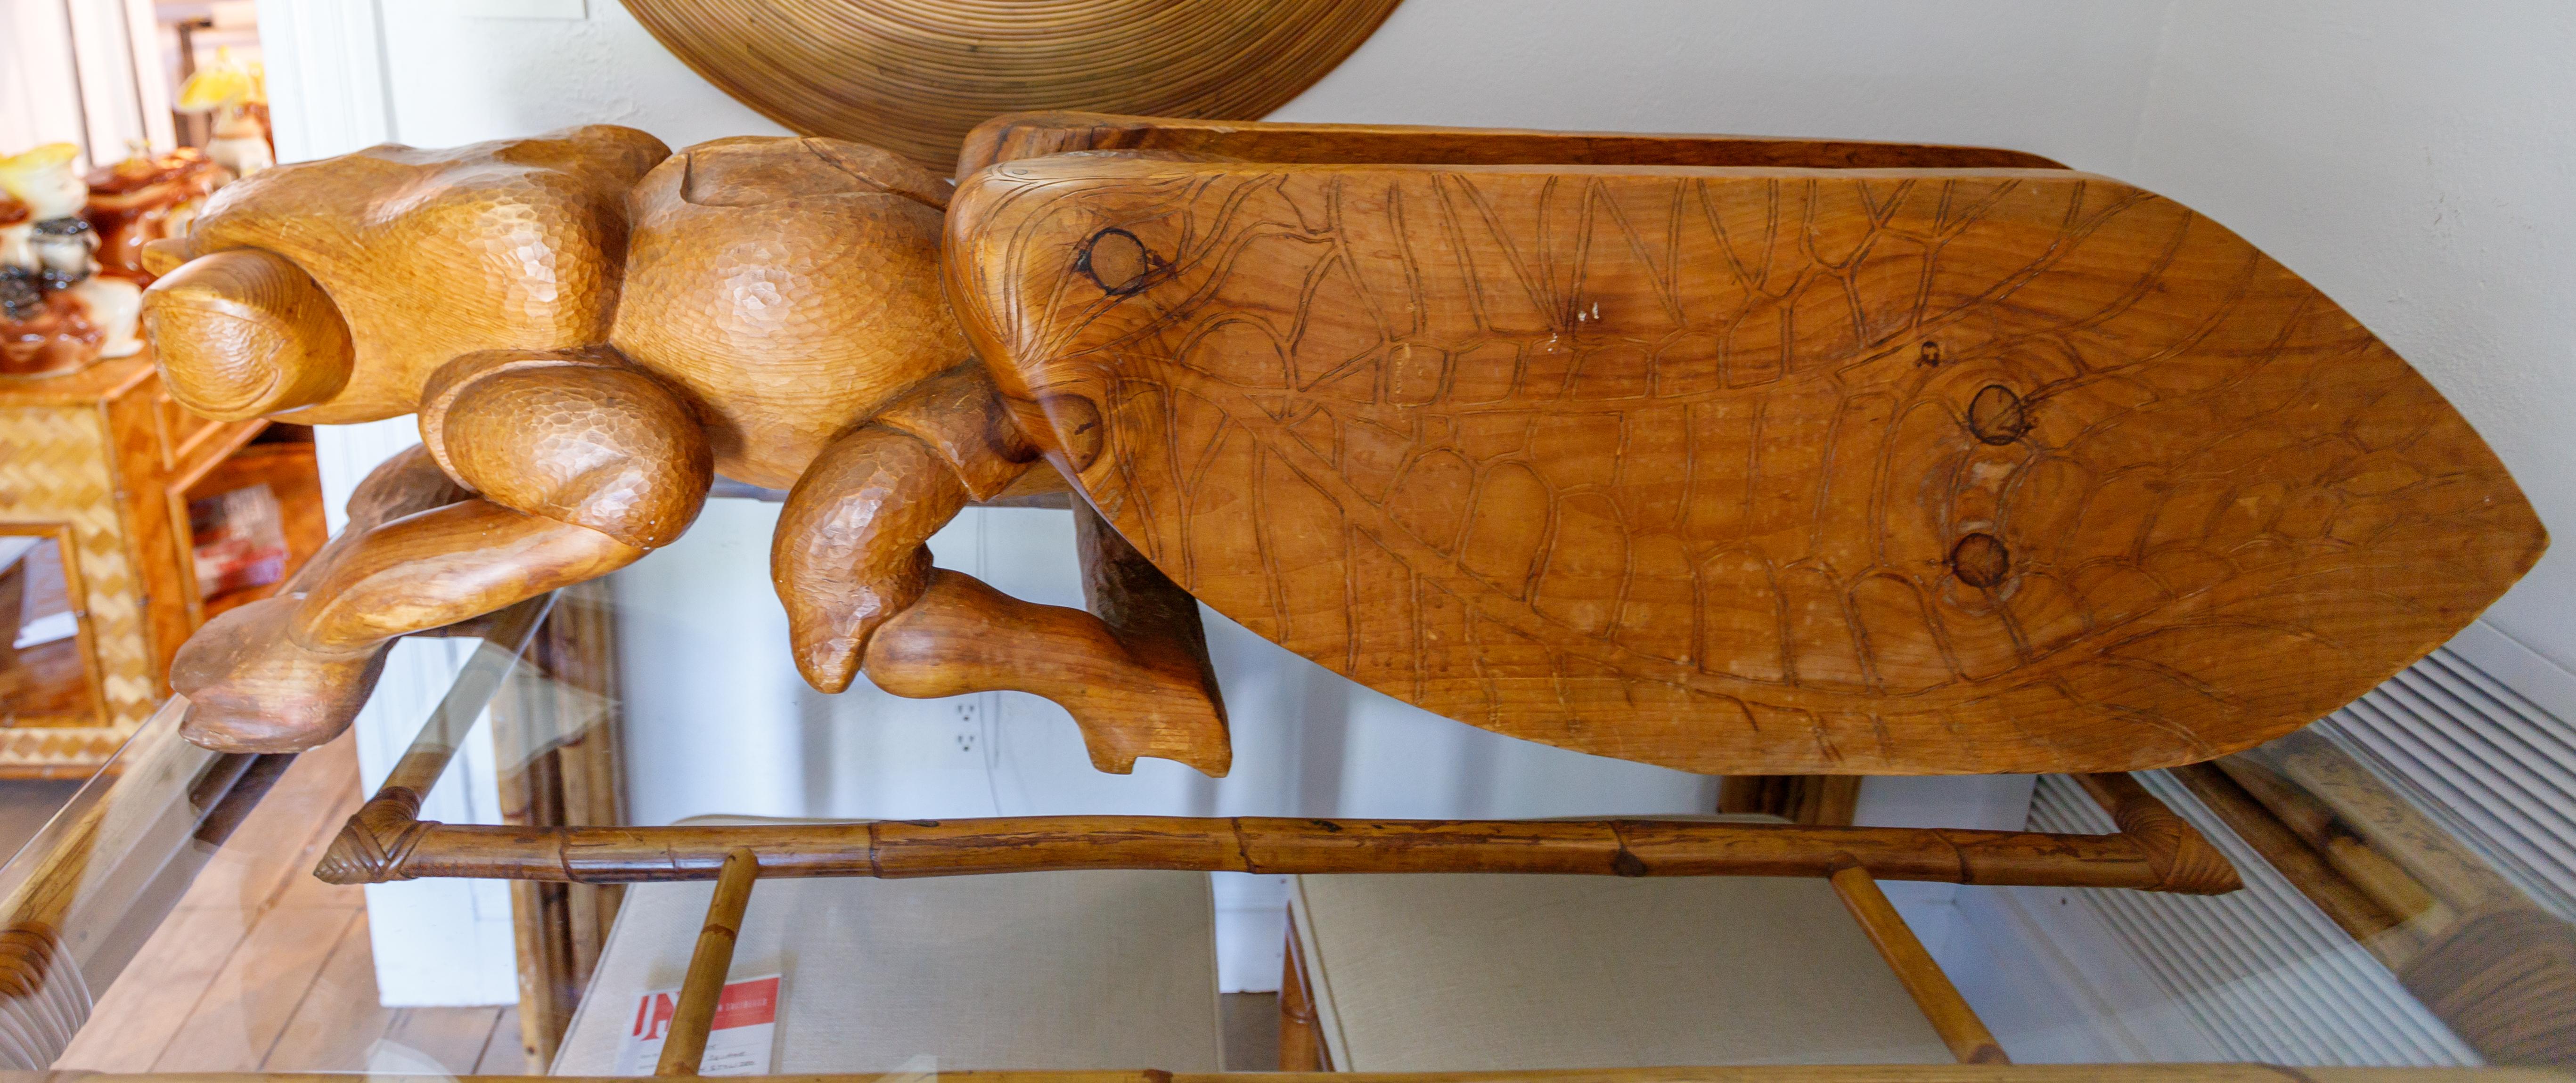 American Solid Tropical Hard Wood Sculpture in the Form of a Locust/Cicada